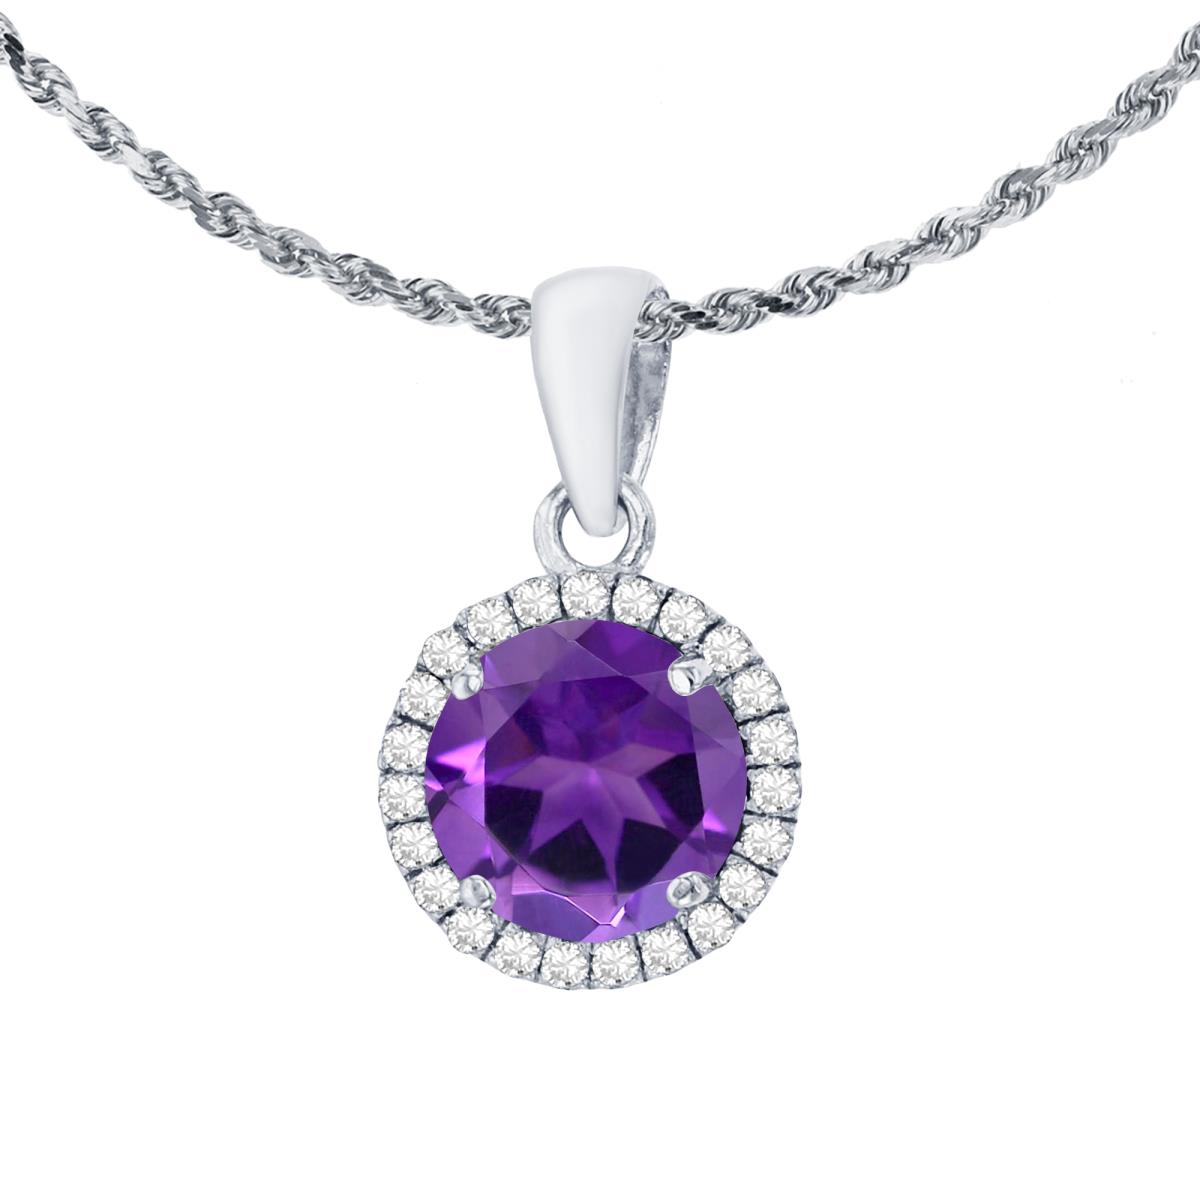 14K White Gold 7mm Round Amethyst & 0.12 CTTW Diamond Halo 18" Rope Chain Necklace